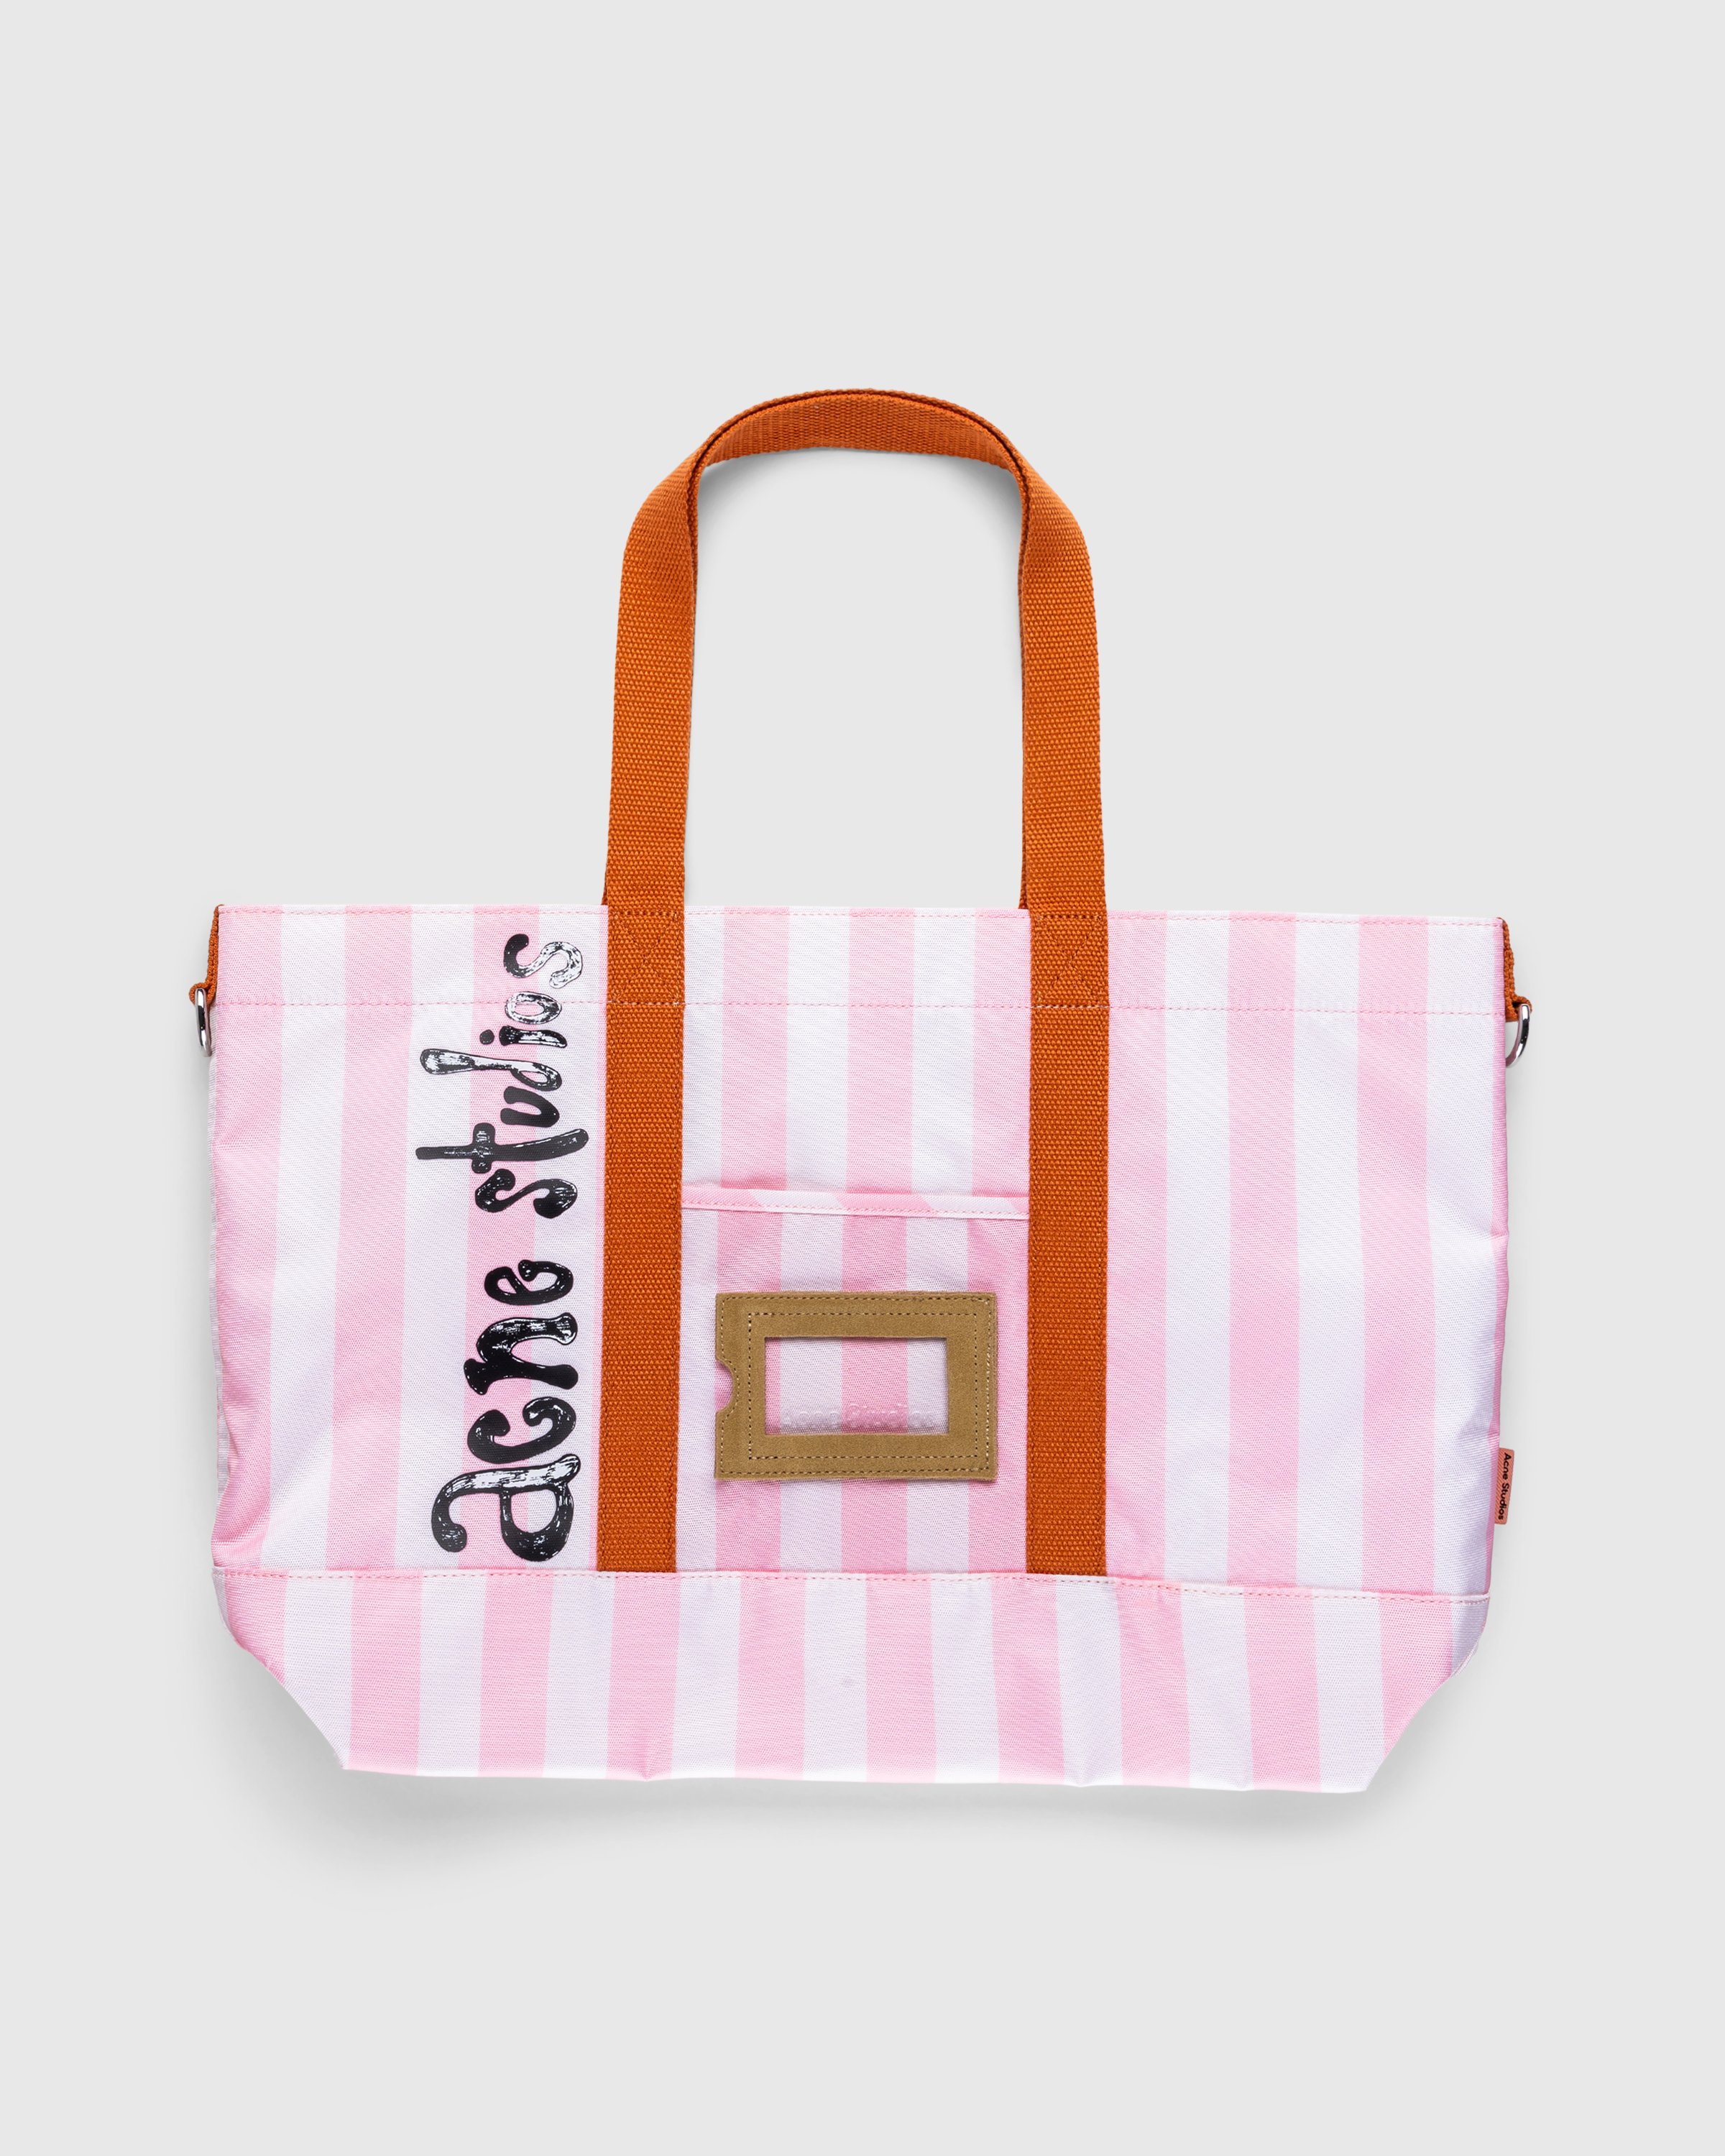 Acne Studios - FN-UX-BAGS000153 Light Pink/ Off White - Accessories - Pink - Image 1